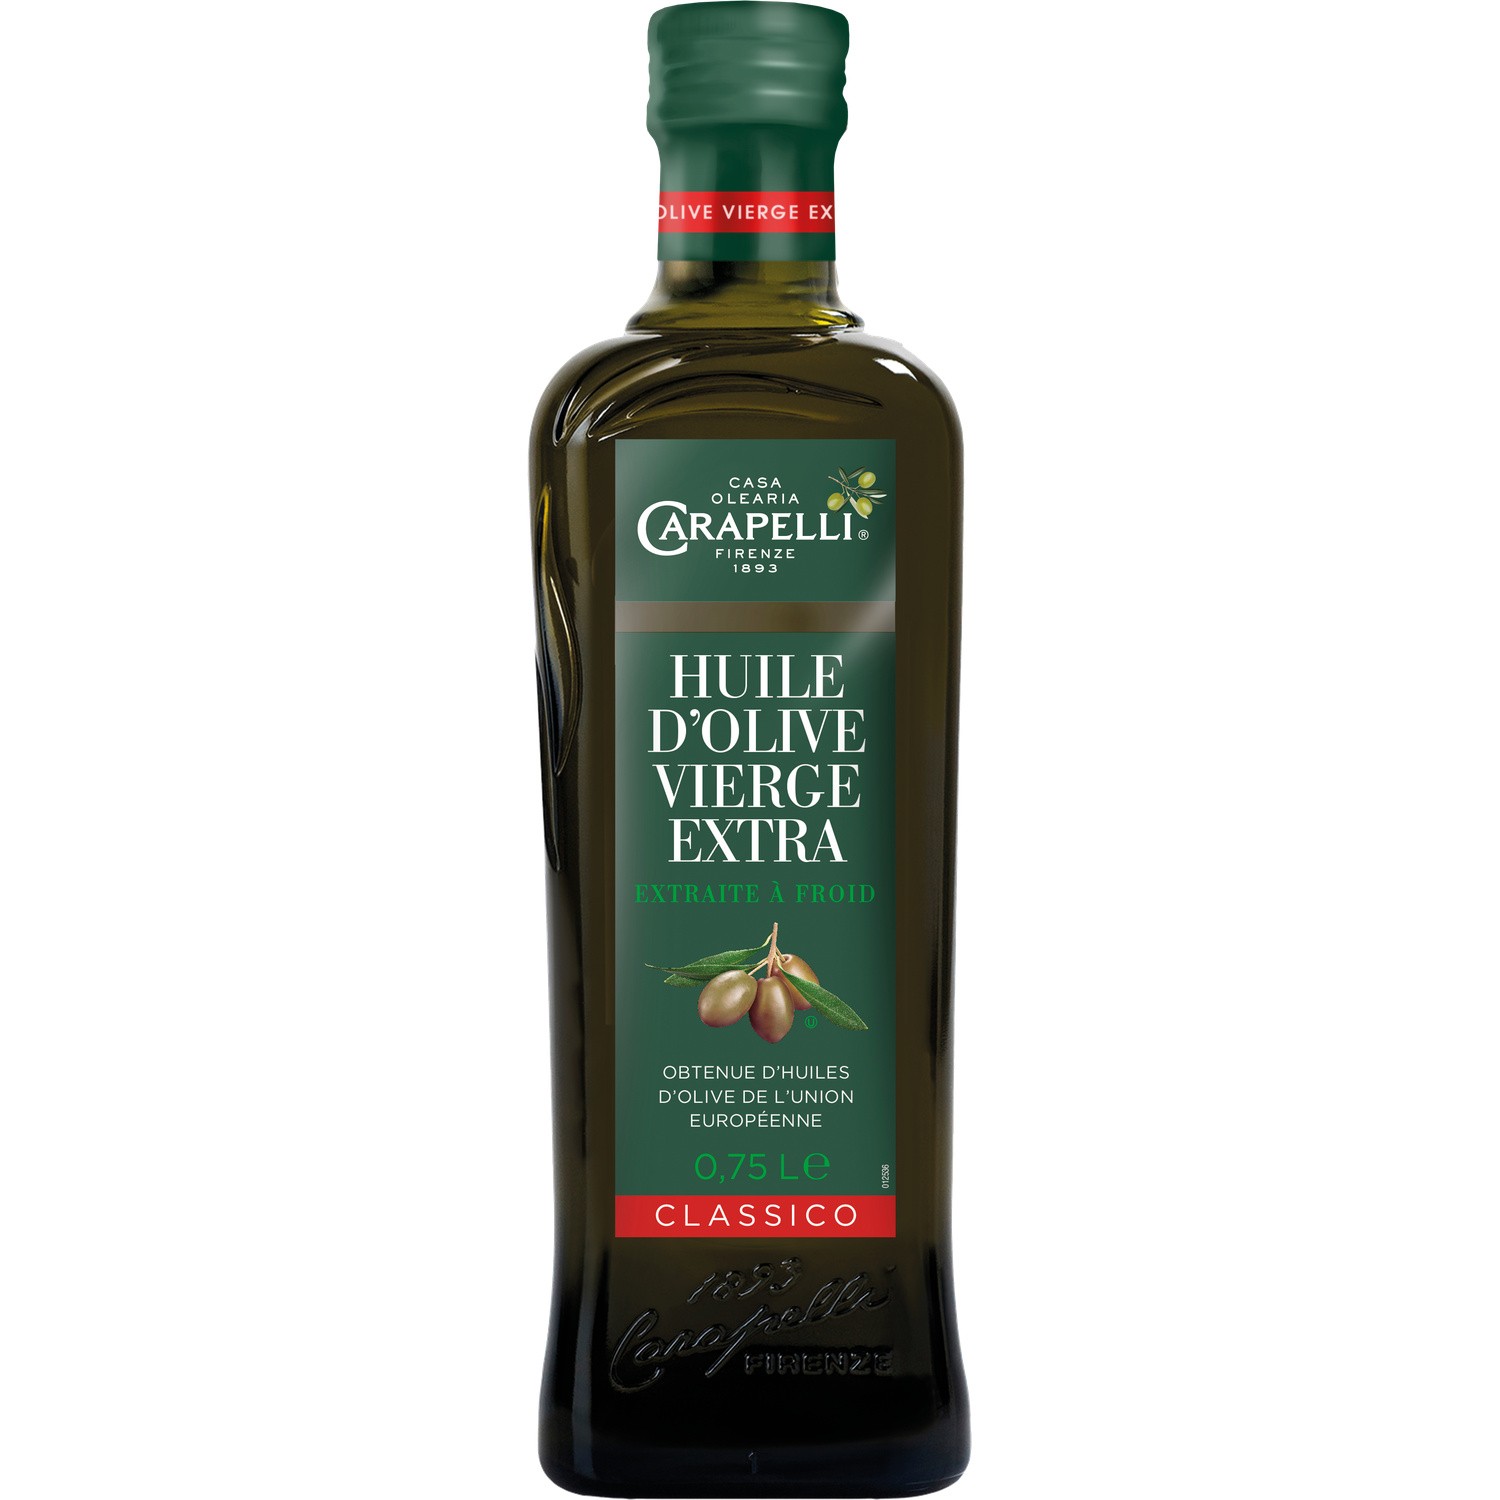 Huile d'Olive vierge extra Classico